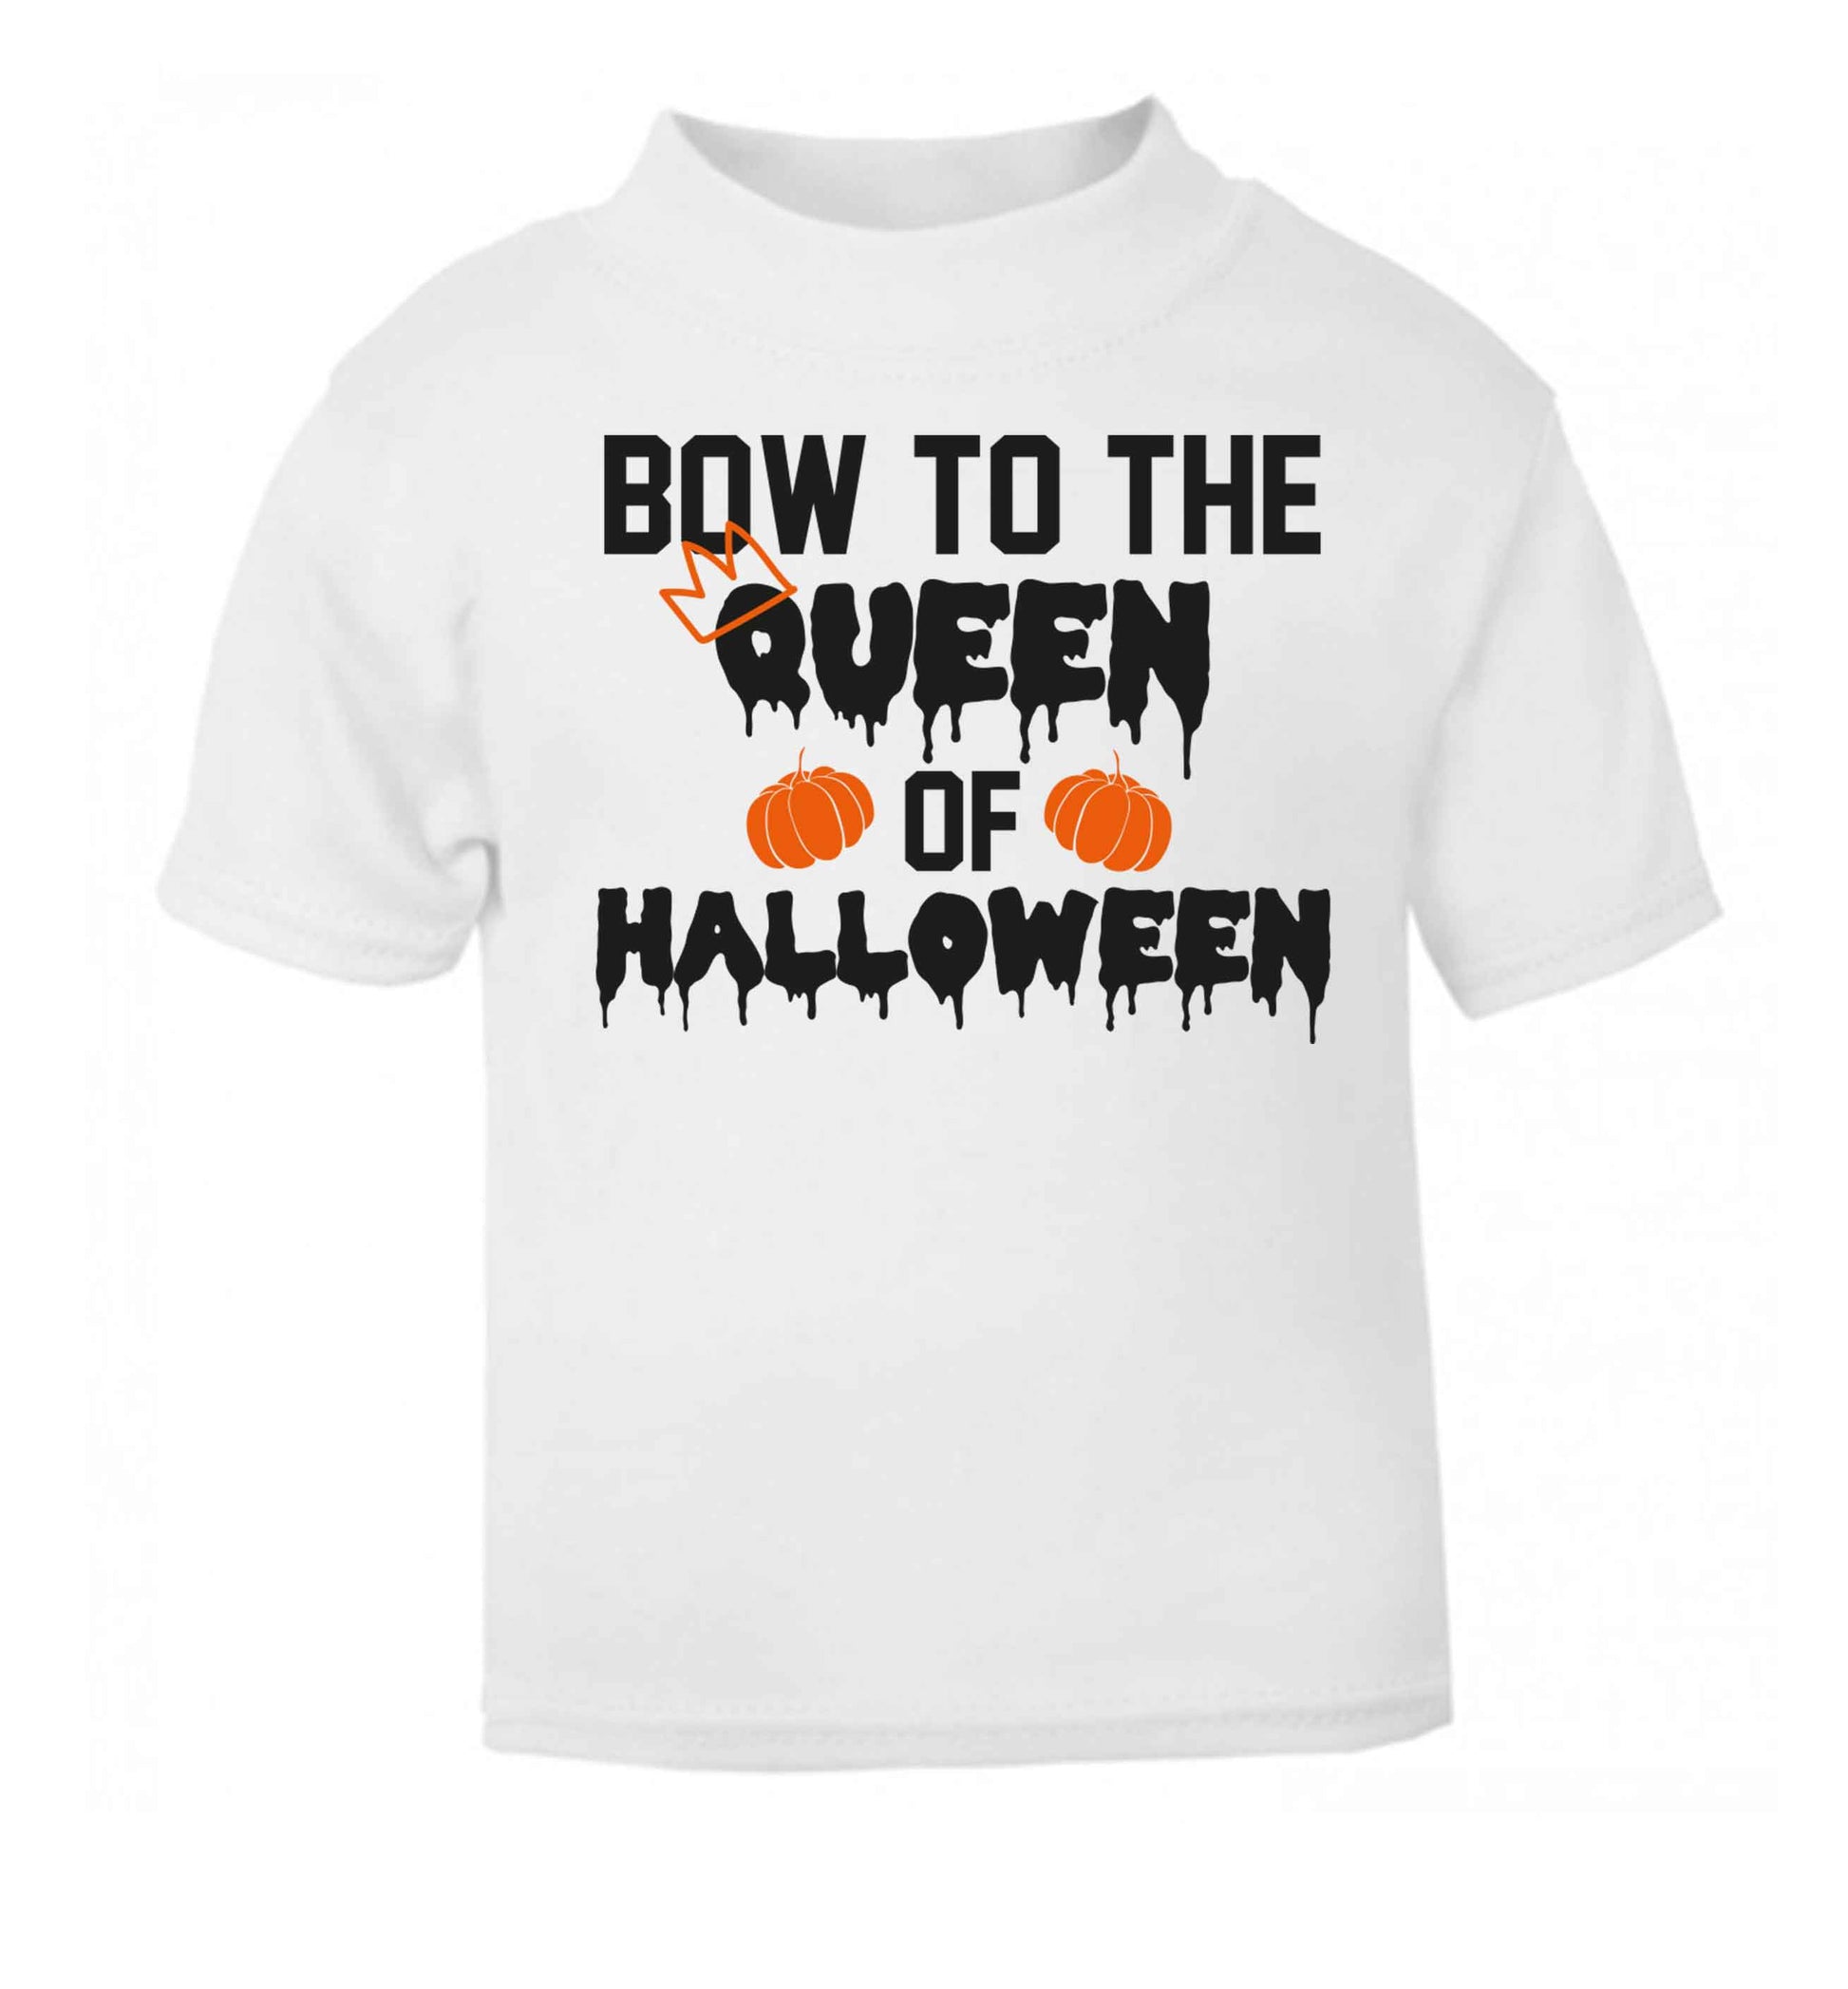 Bow to the Queen of halloween white baby toddler Tshirt 2 Years